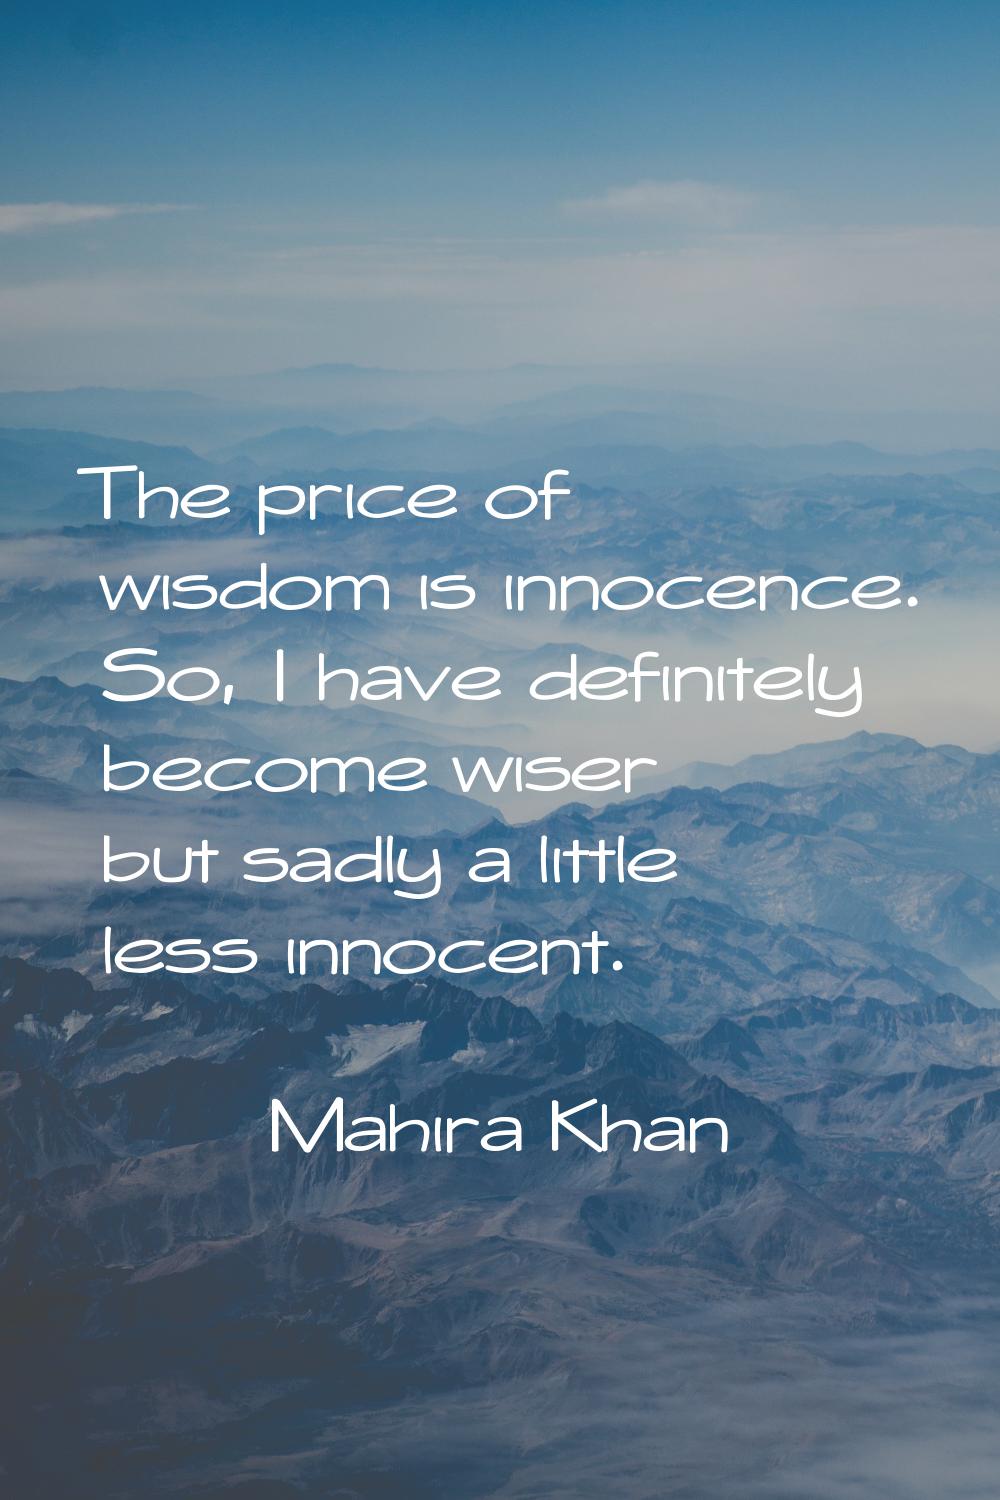 The price of wisdom is innocence. So, I have definitely become wiser but sadly a little less innoce